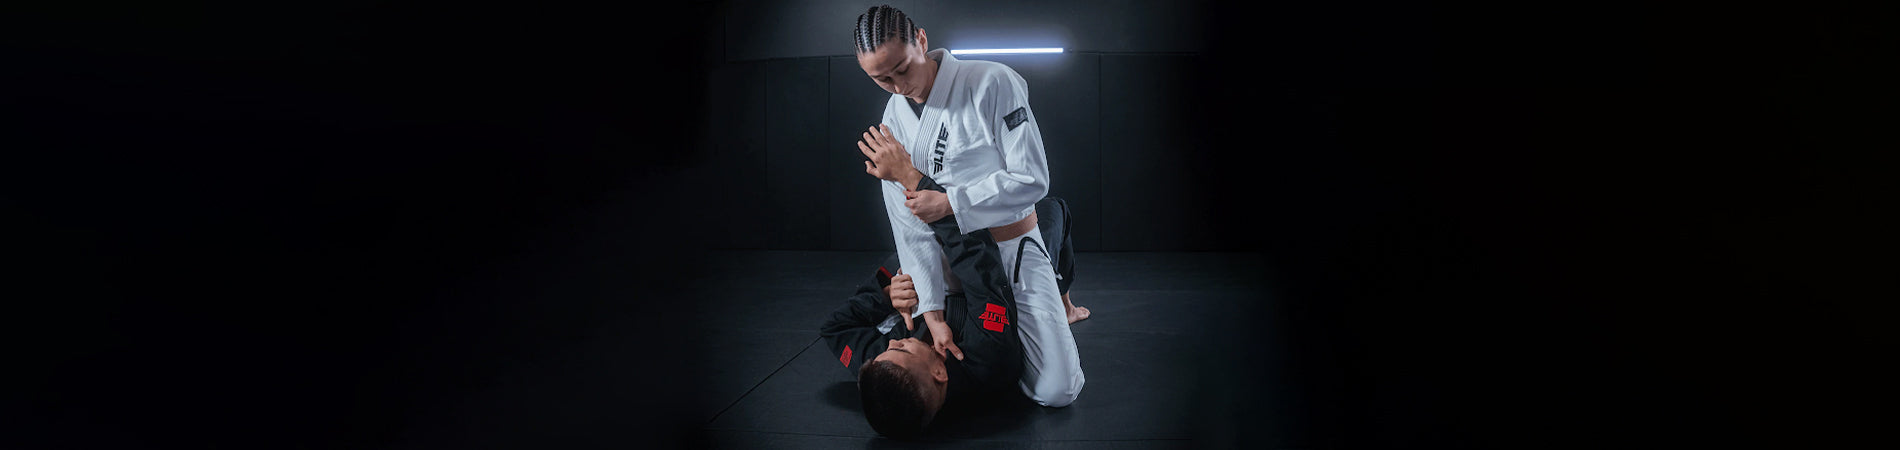 Learning BJJ for Women’s Health and Safety